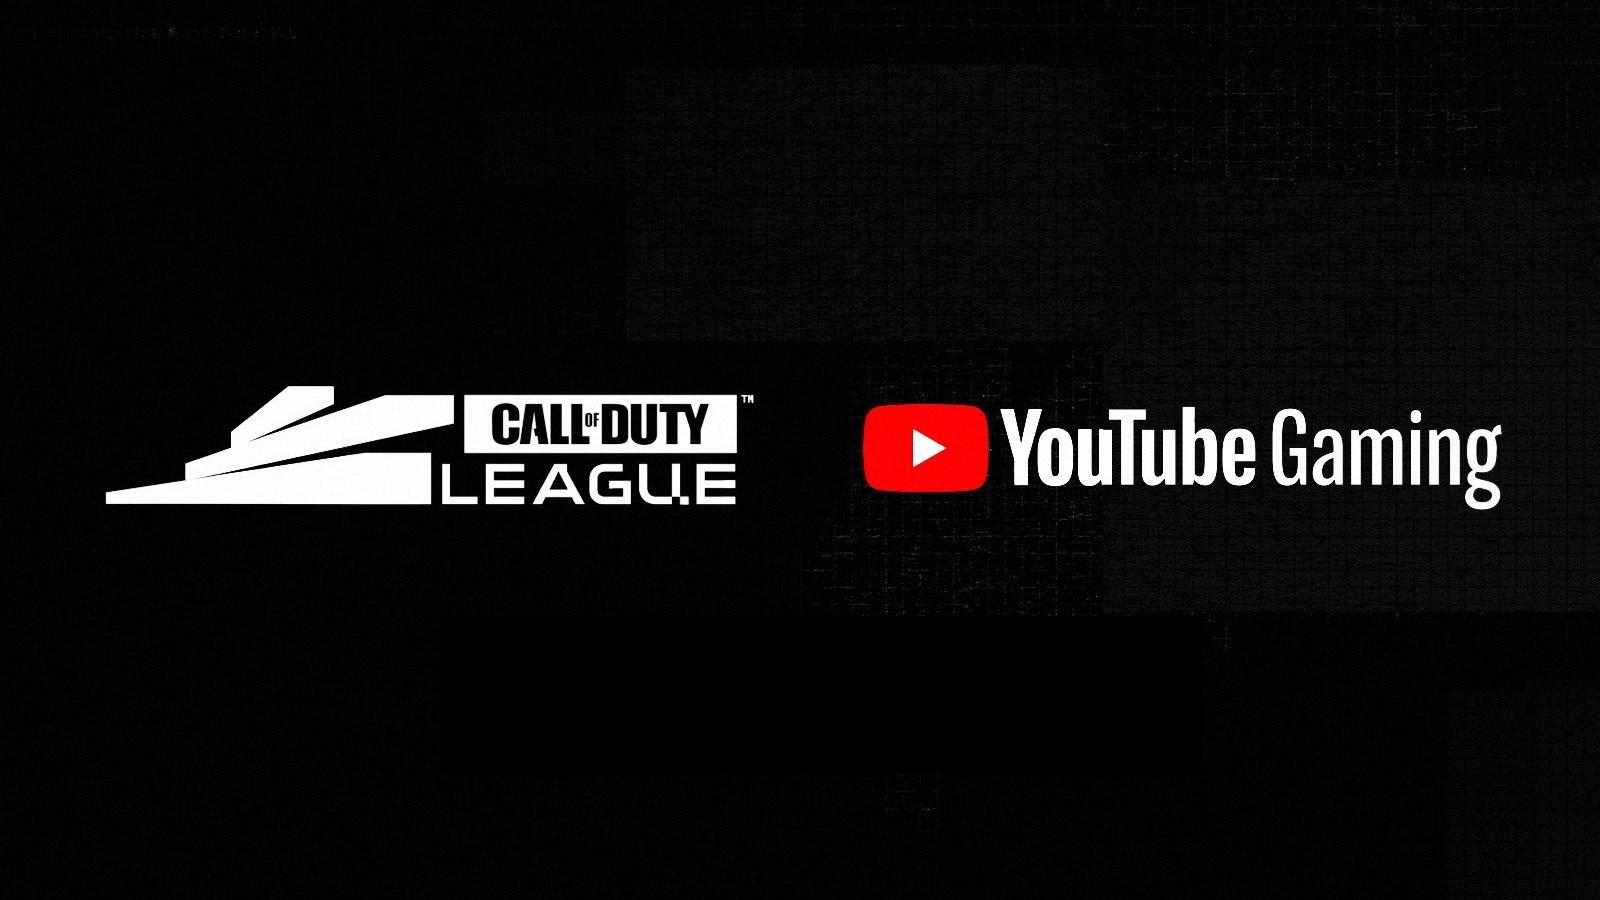 Call of Duty League and YouTube Gaming logo side by side